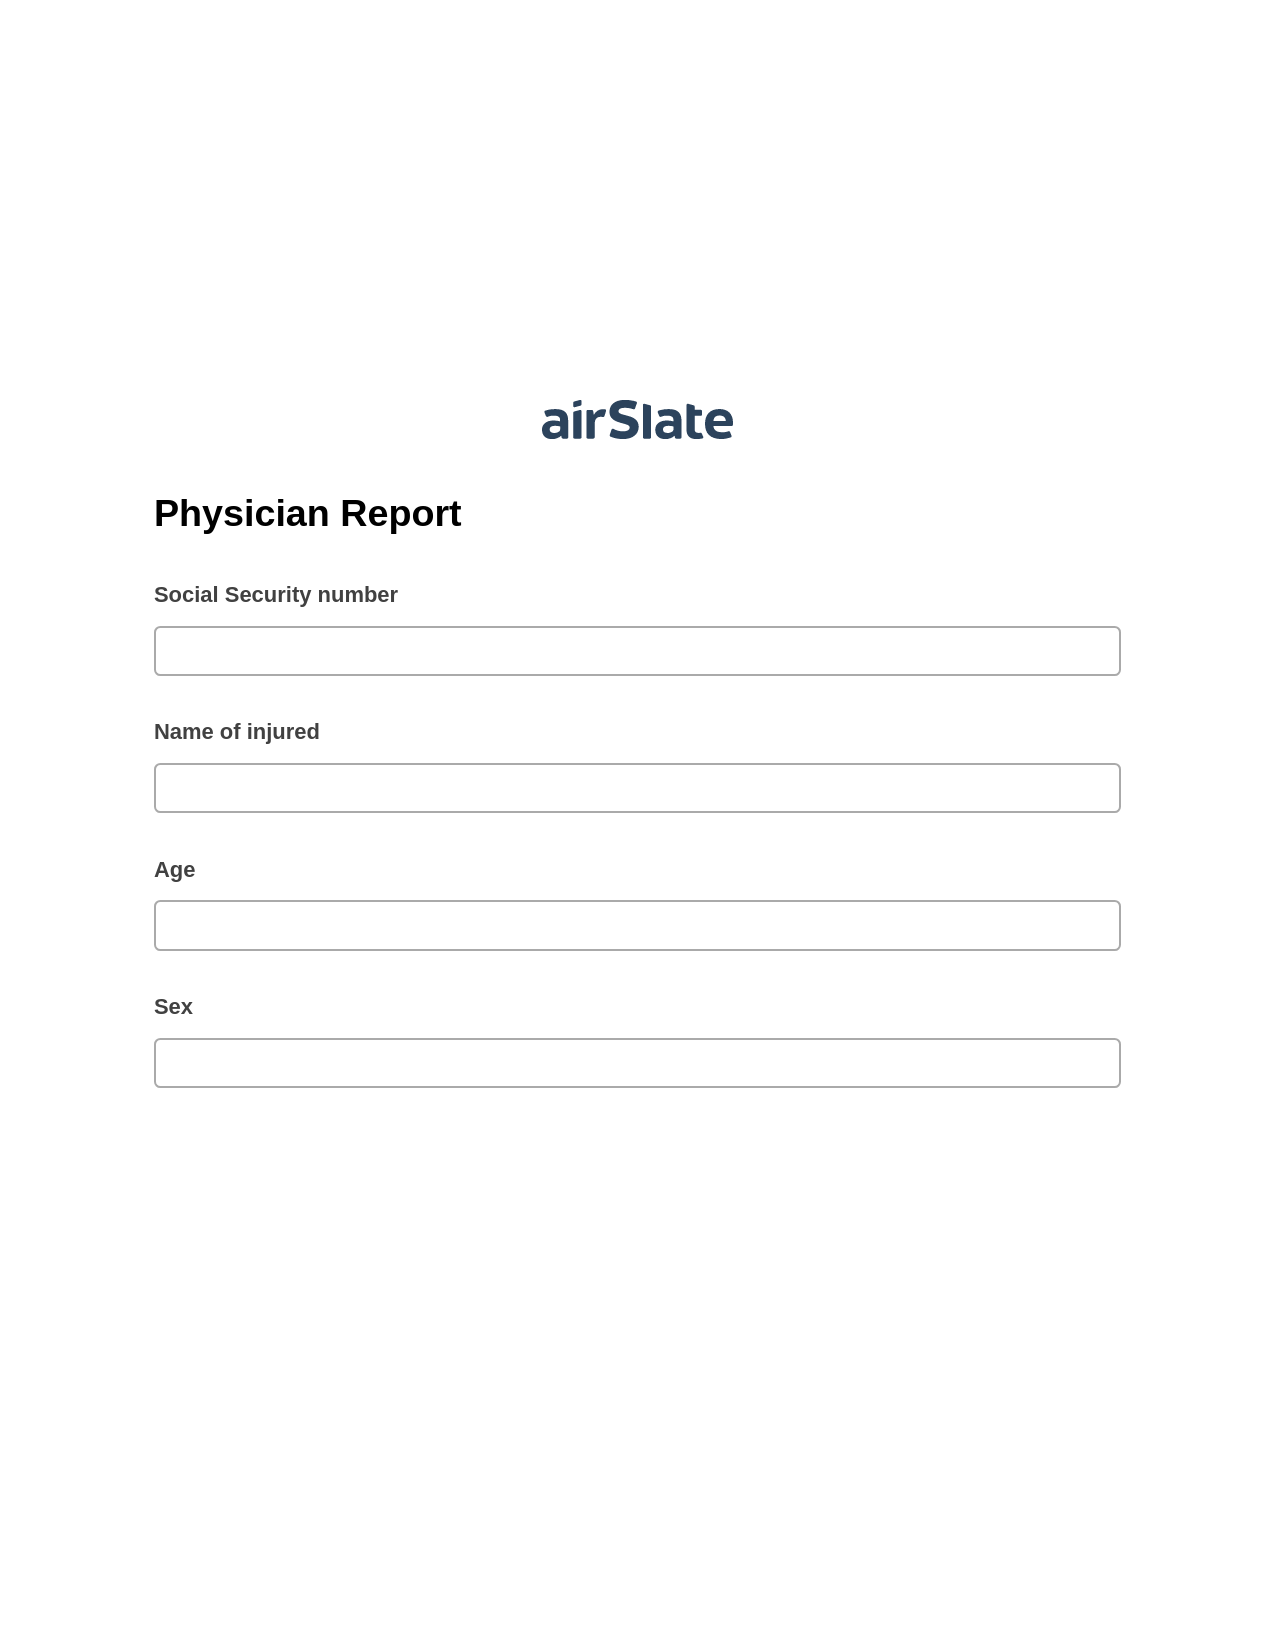 Physician Report Pre-fill from Excel Spreadsheet Bot, SendGrid send Campaign bot, Export to WebMerge Bot